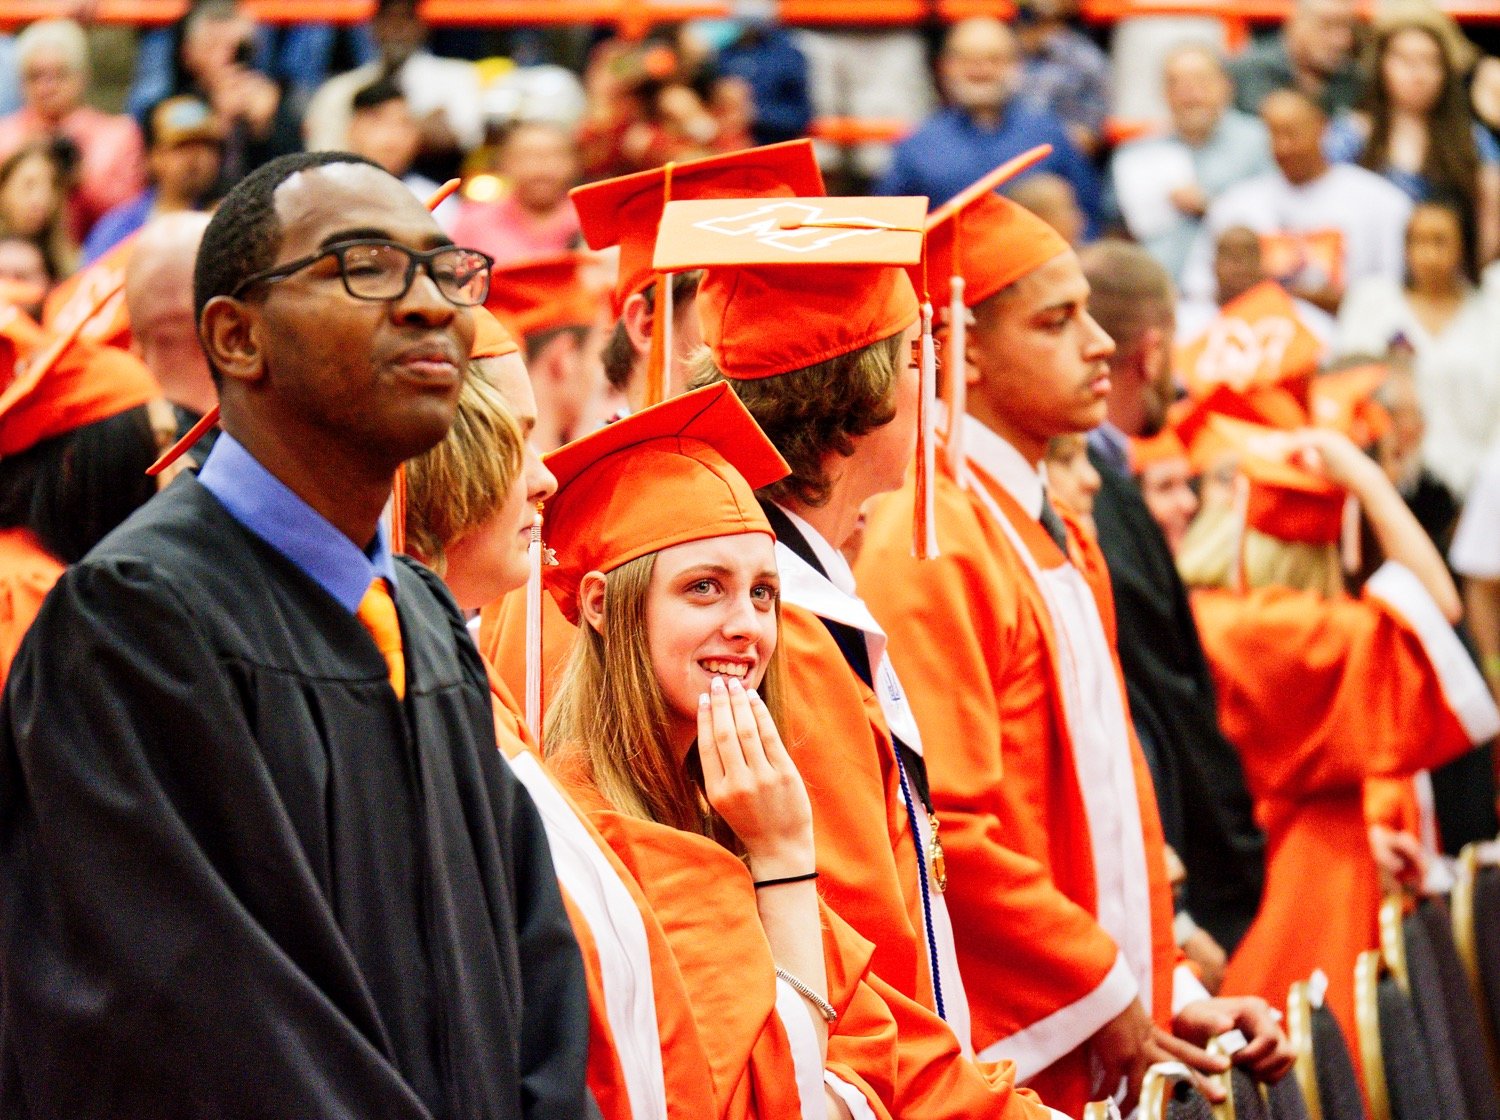 2021 grad Austin Hill spots loved ones in the crowd filling the Mineola High gym just before the commencement ceremonies begin. At left, coach Jaylon Harper, MHS class of 2020, looks on with pride during his first ceremony as staff since graduating. [more moments of Mineola grads]